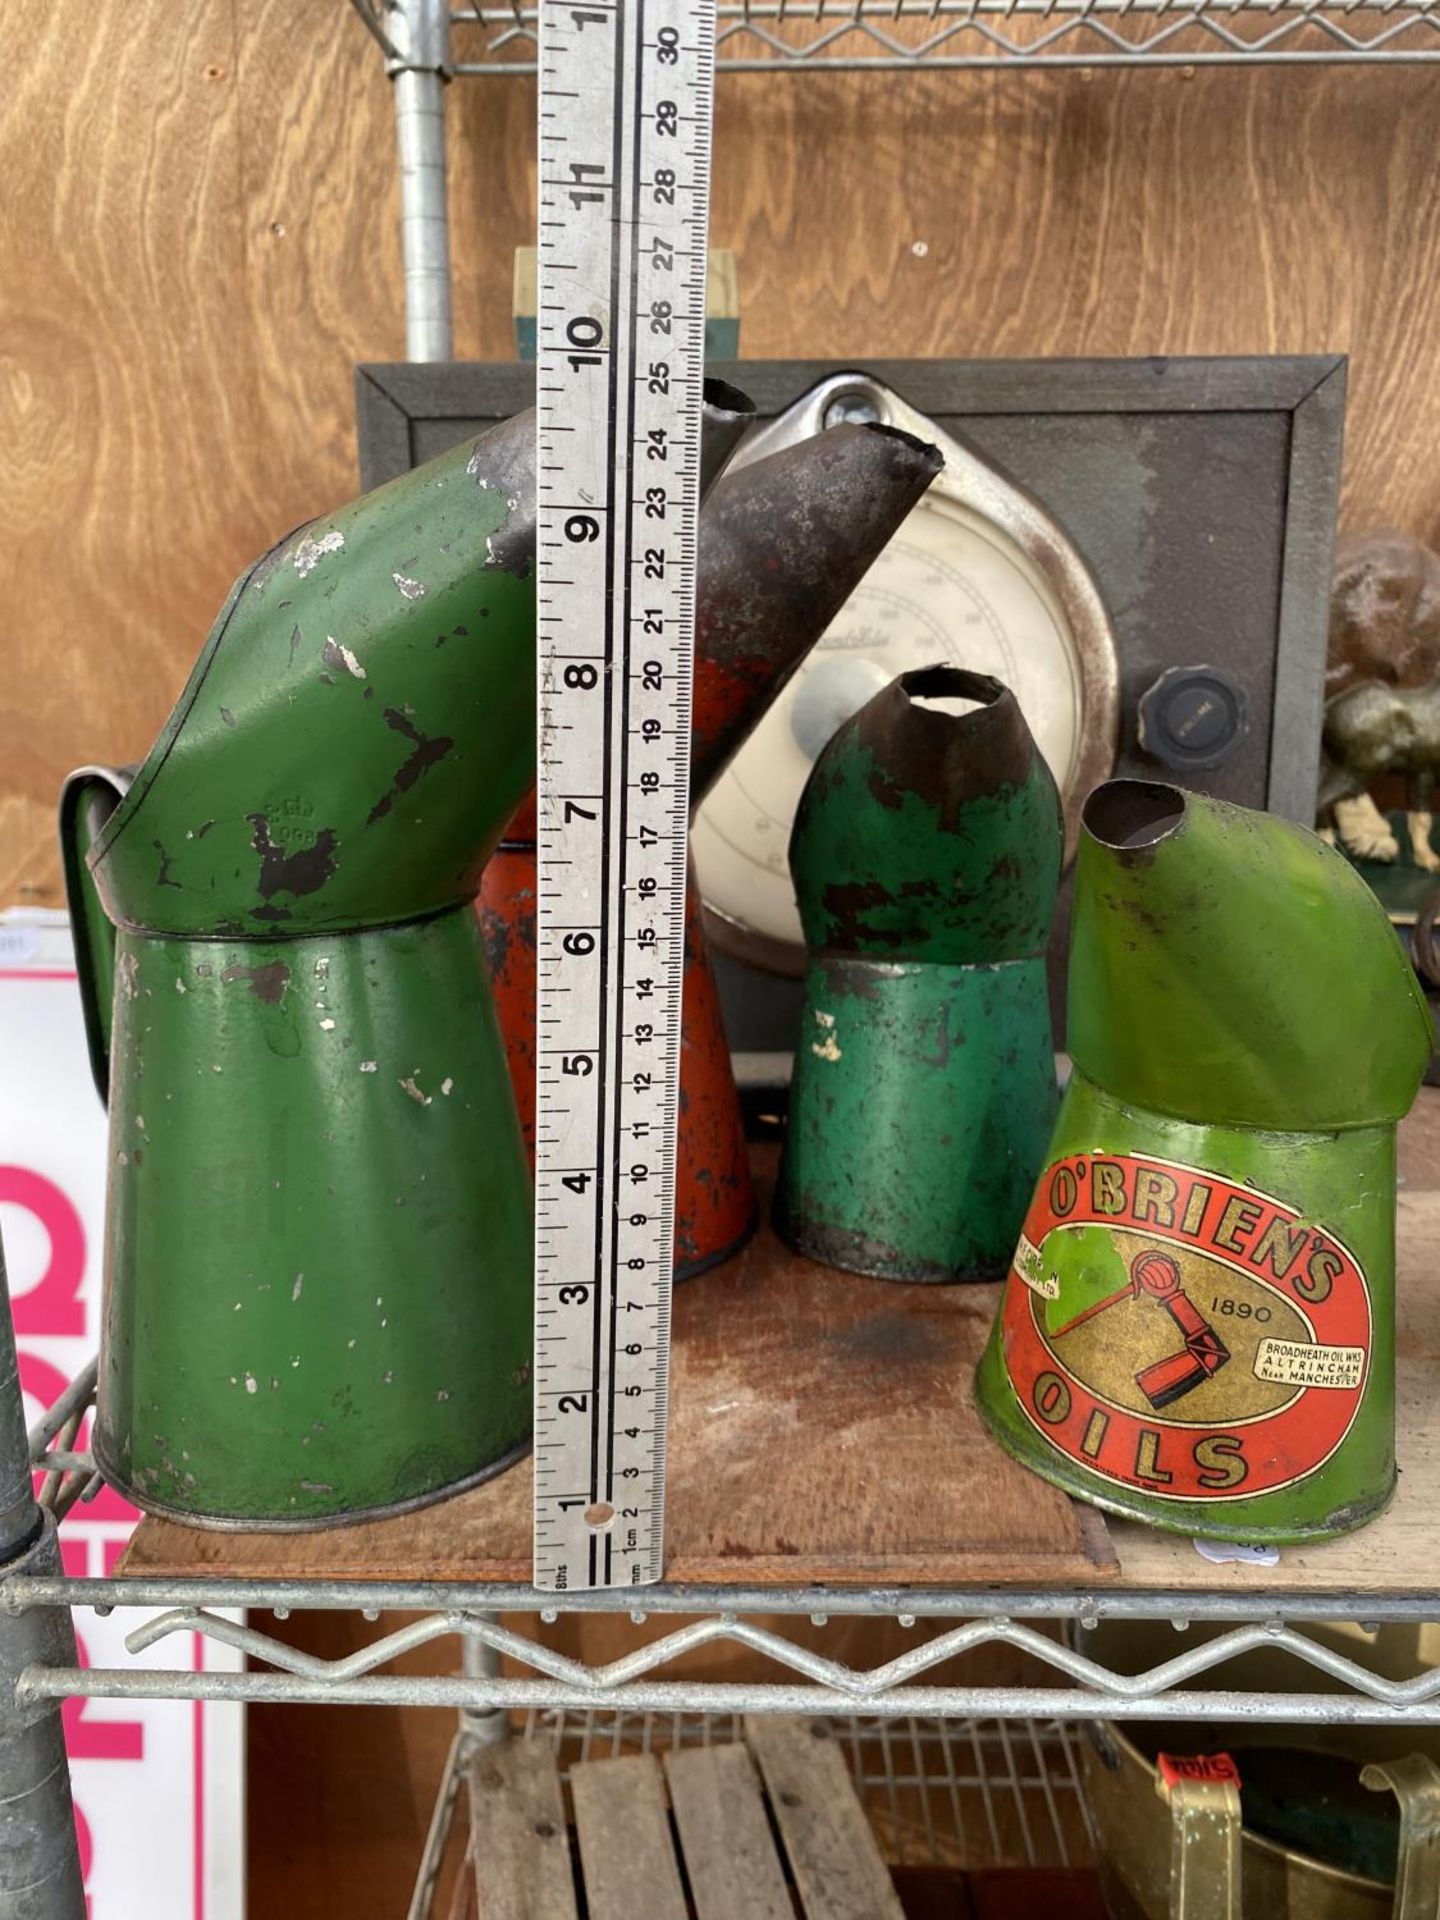 A COLLECTION OF FIVE VINTAGE OIL JUGS TO INCLUDE ONE BEARING THE LABEL 'O'BRIENS' - Image 4 of 4